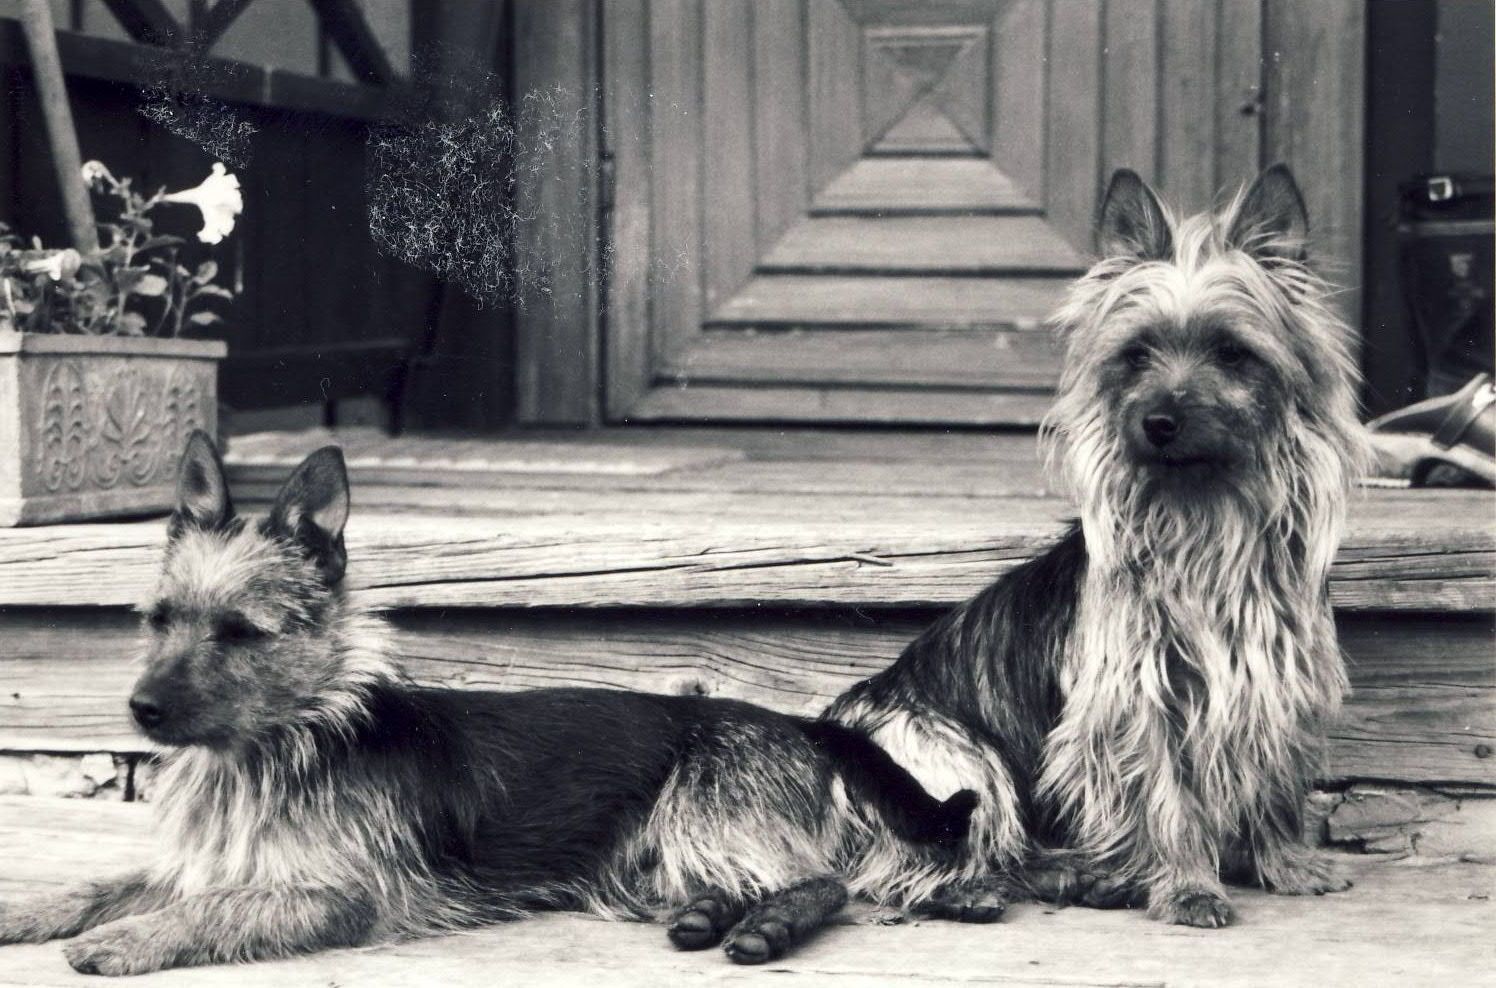 Two dogs from Sweden in the 1980's